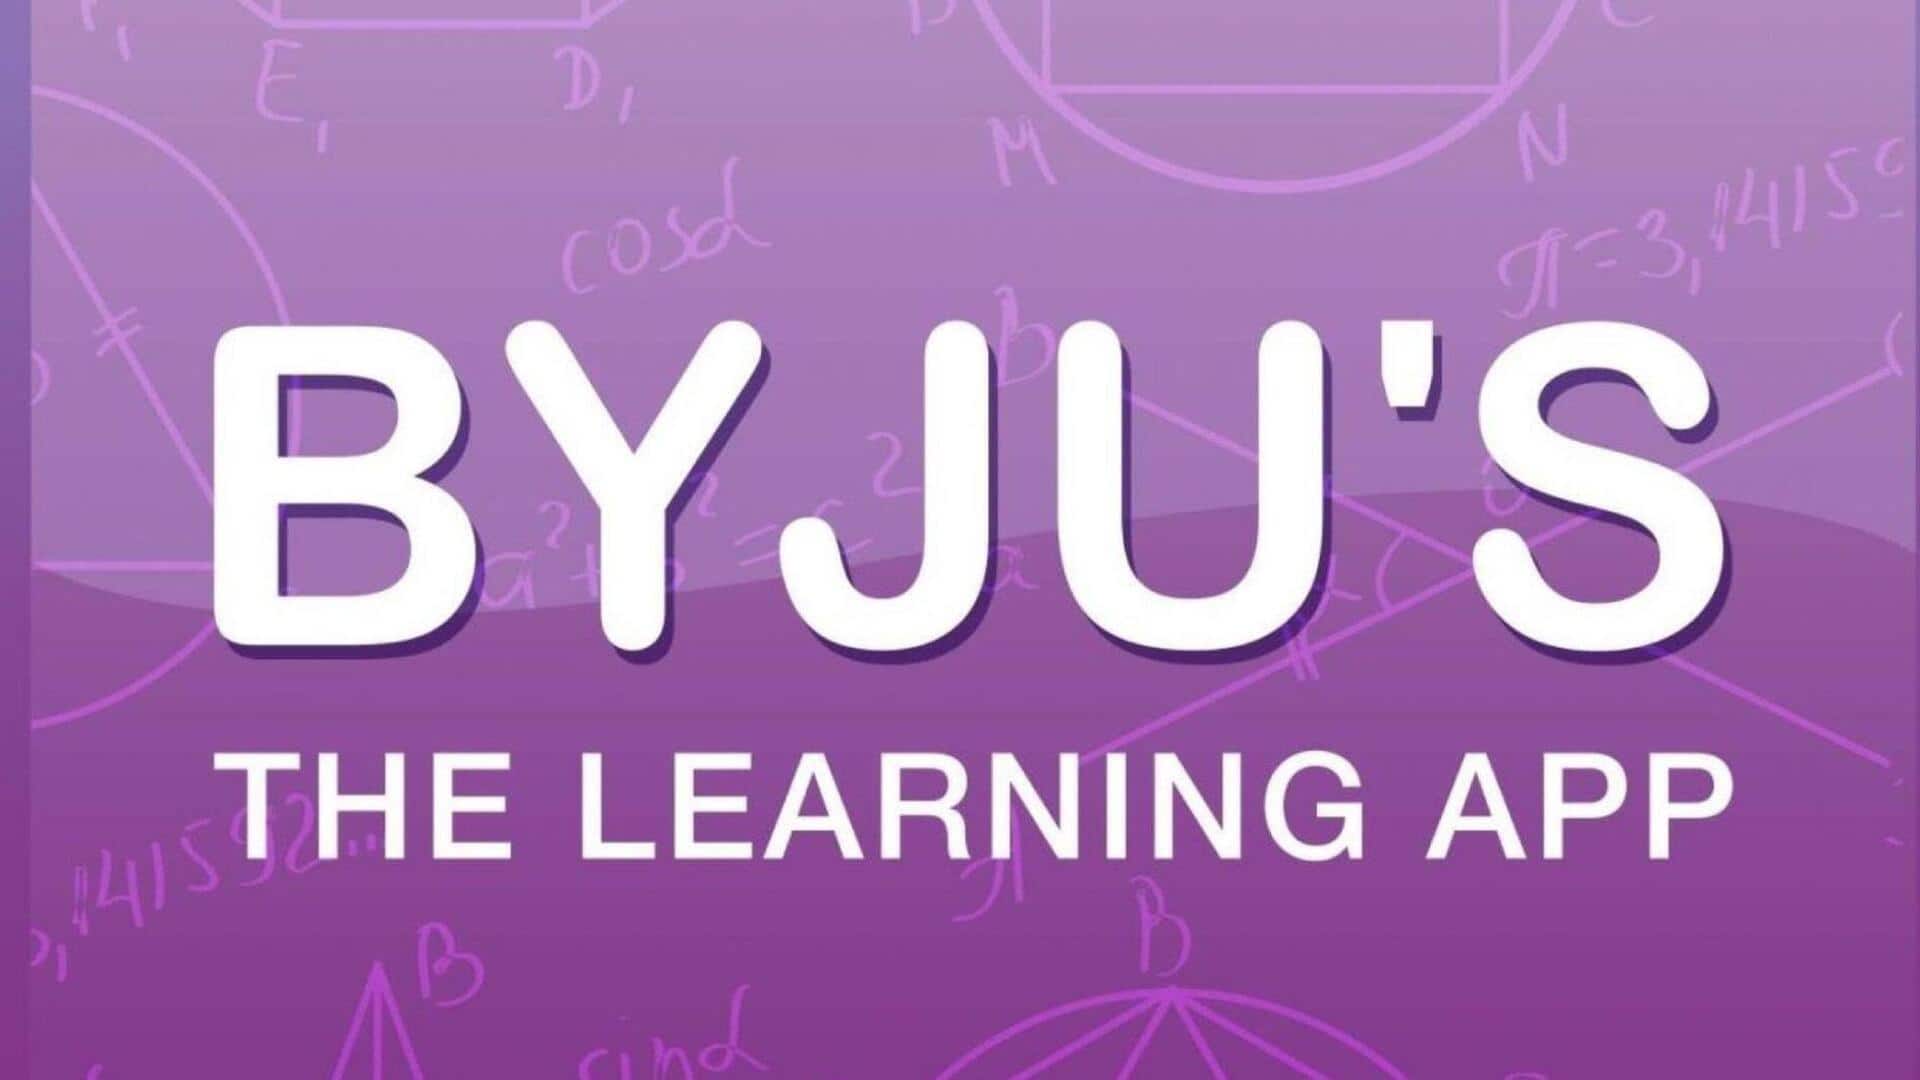 BYJU's appoints Jiny Thattil as CTO following Anil Goel's exit